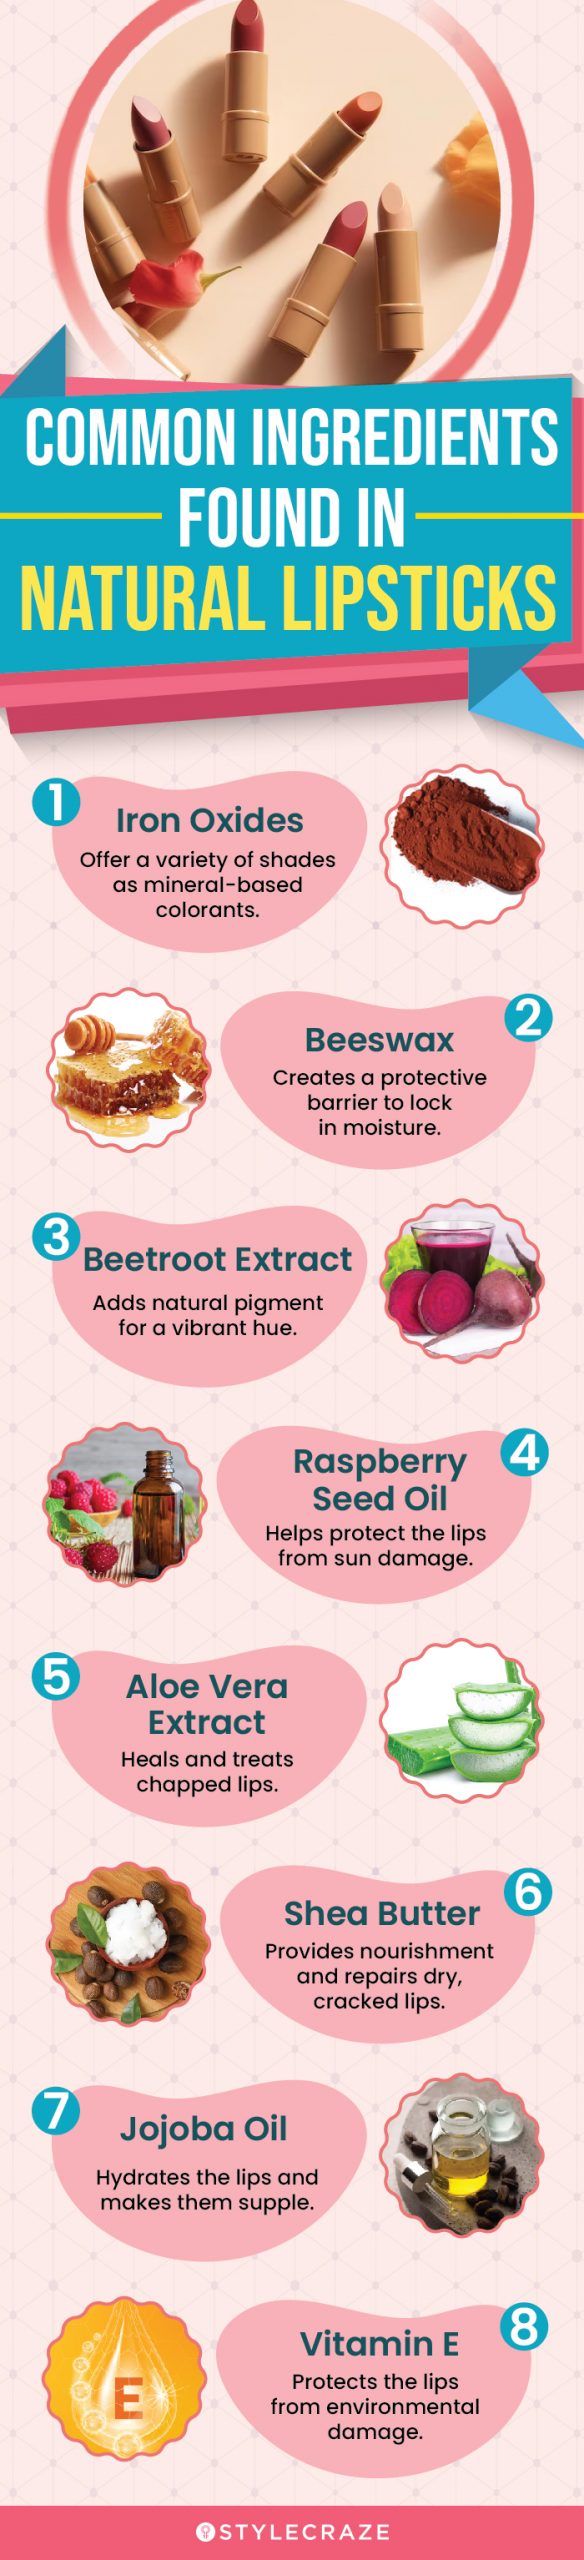 Common Ingredients Found In Natural Lipsticks (infographic)